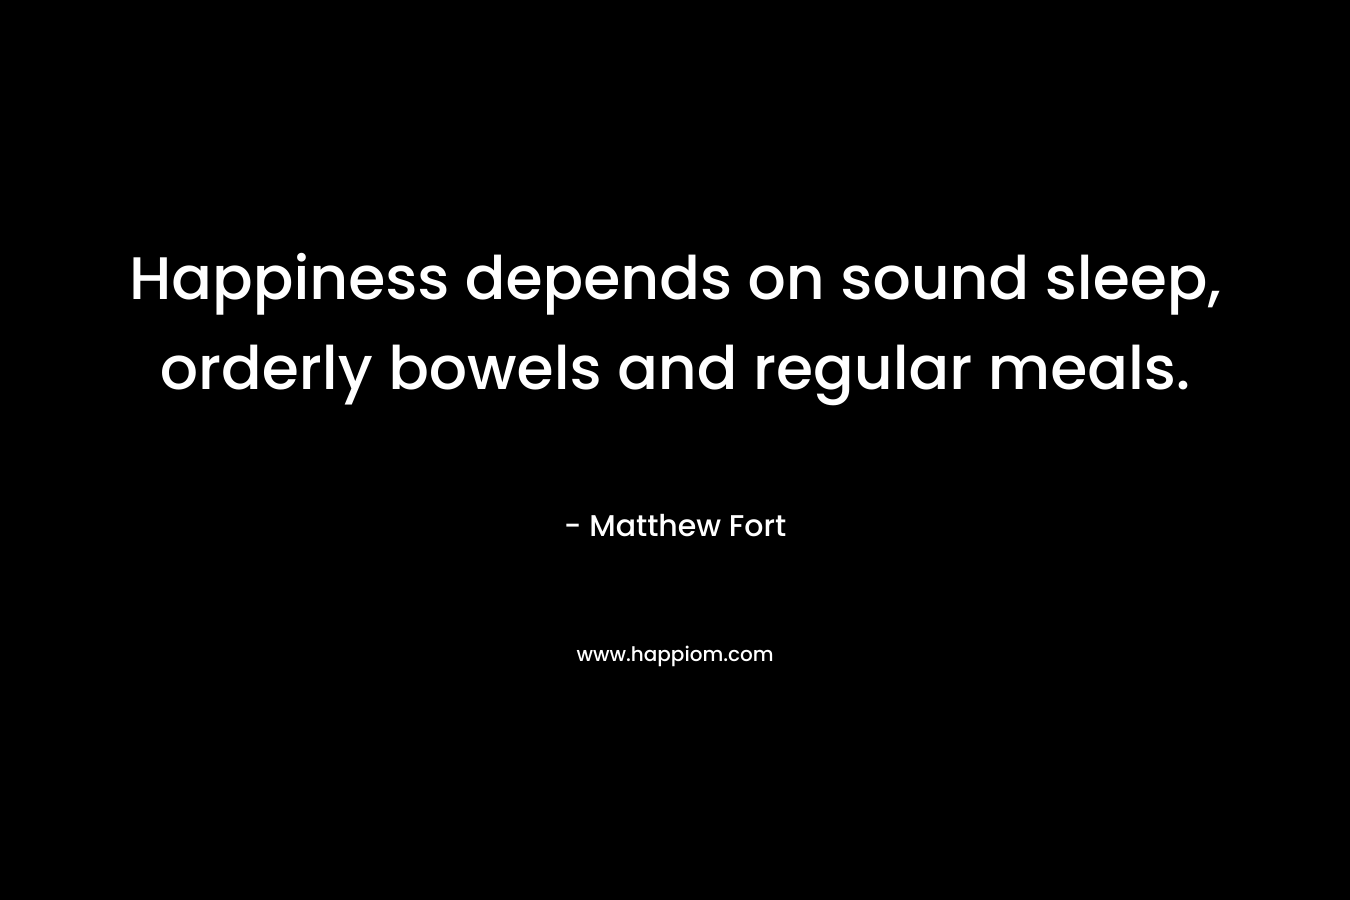 Happiness depends on sound sleep, orderly bowels and regular meals.